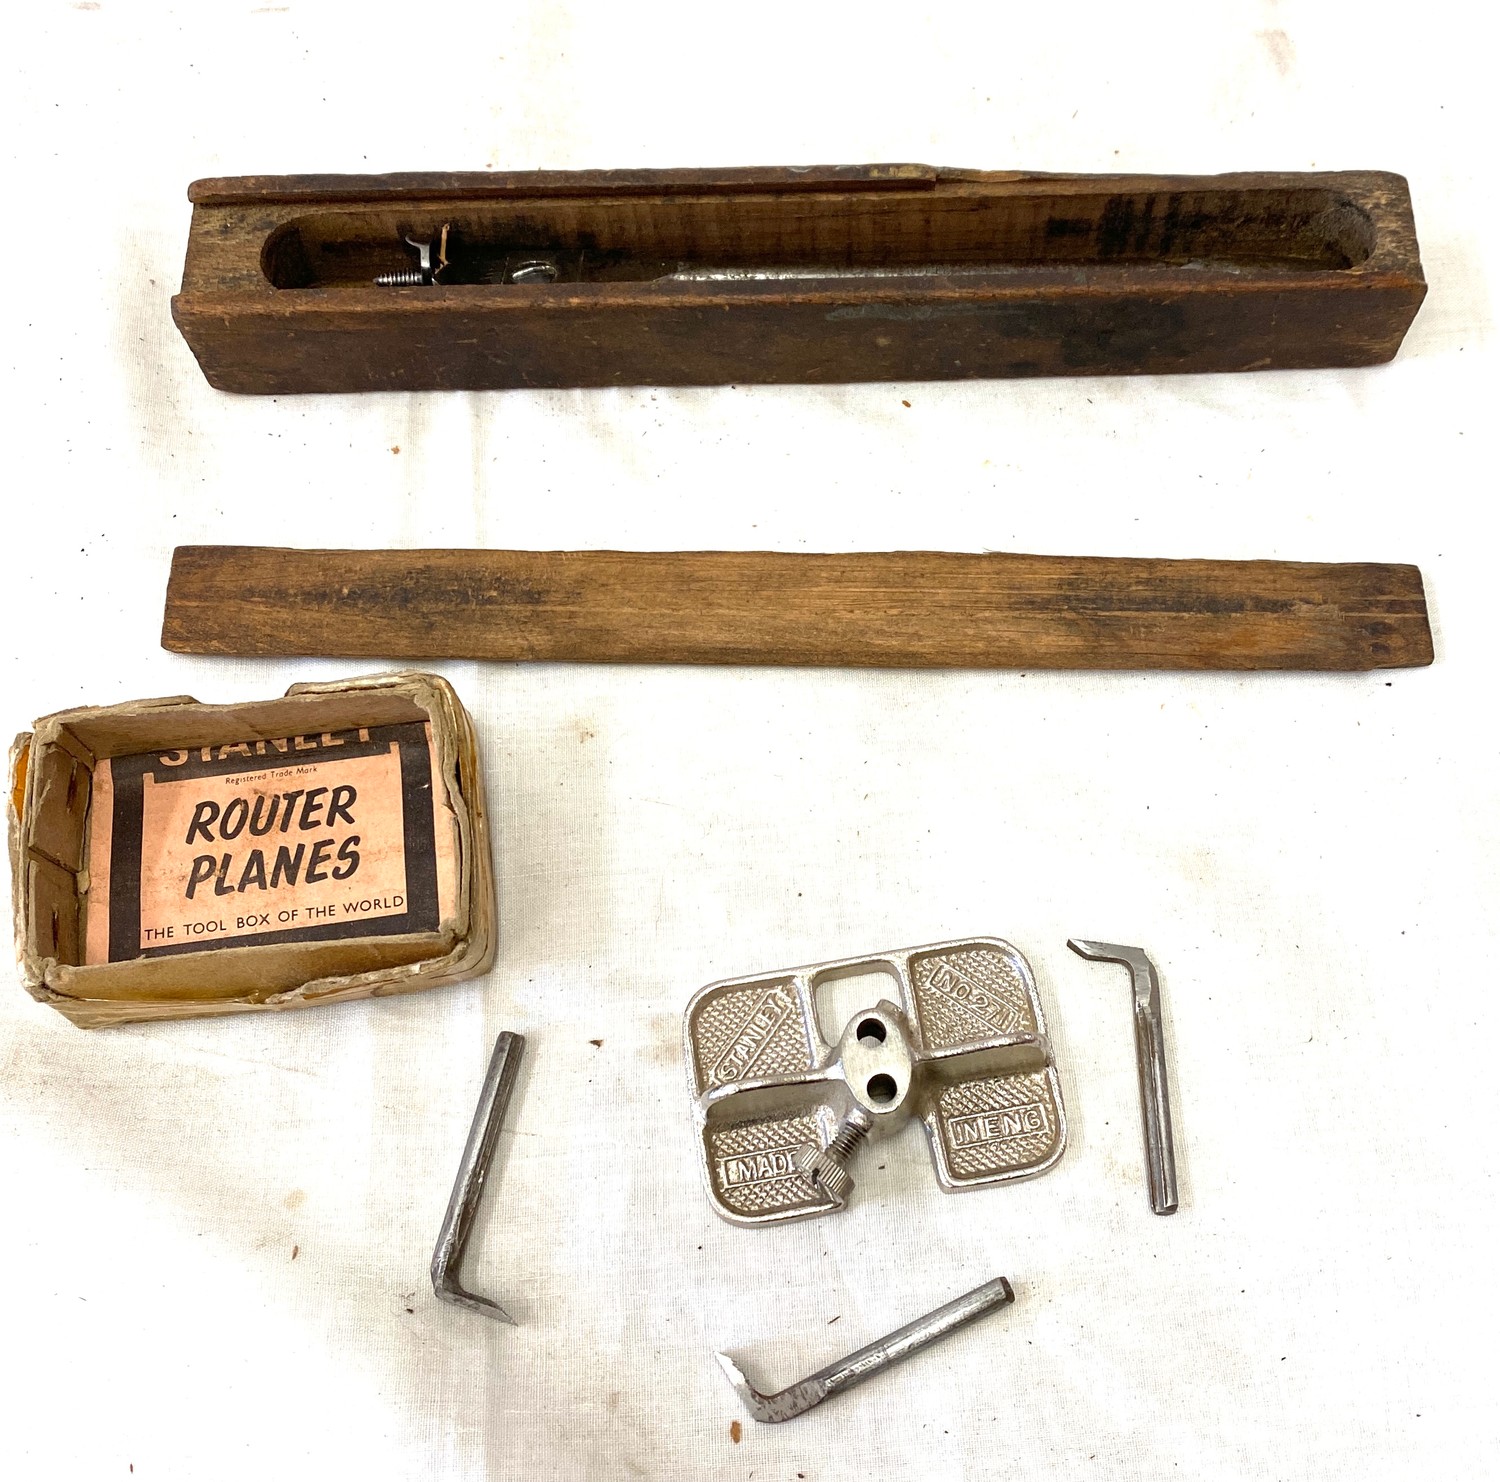 Adjustable drill bit in wooden case and a Stanley router plane 271 - Image 2 of 4